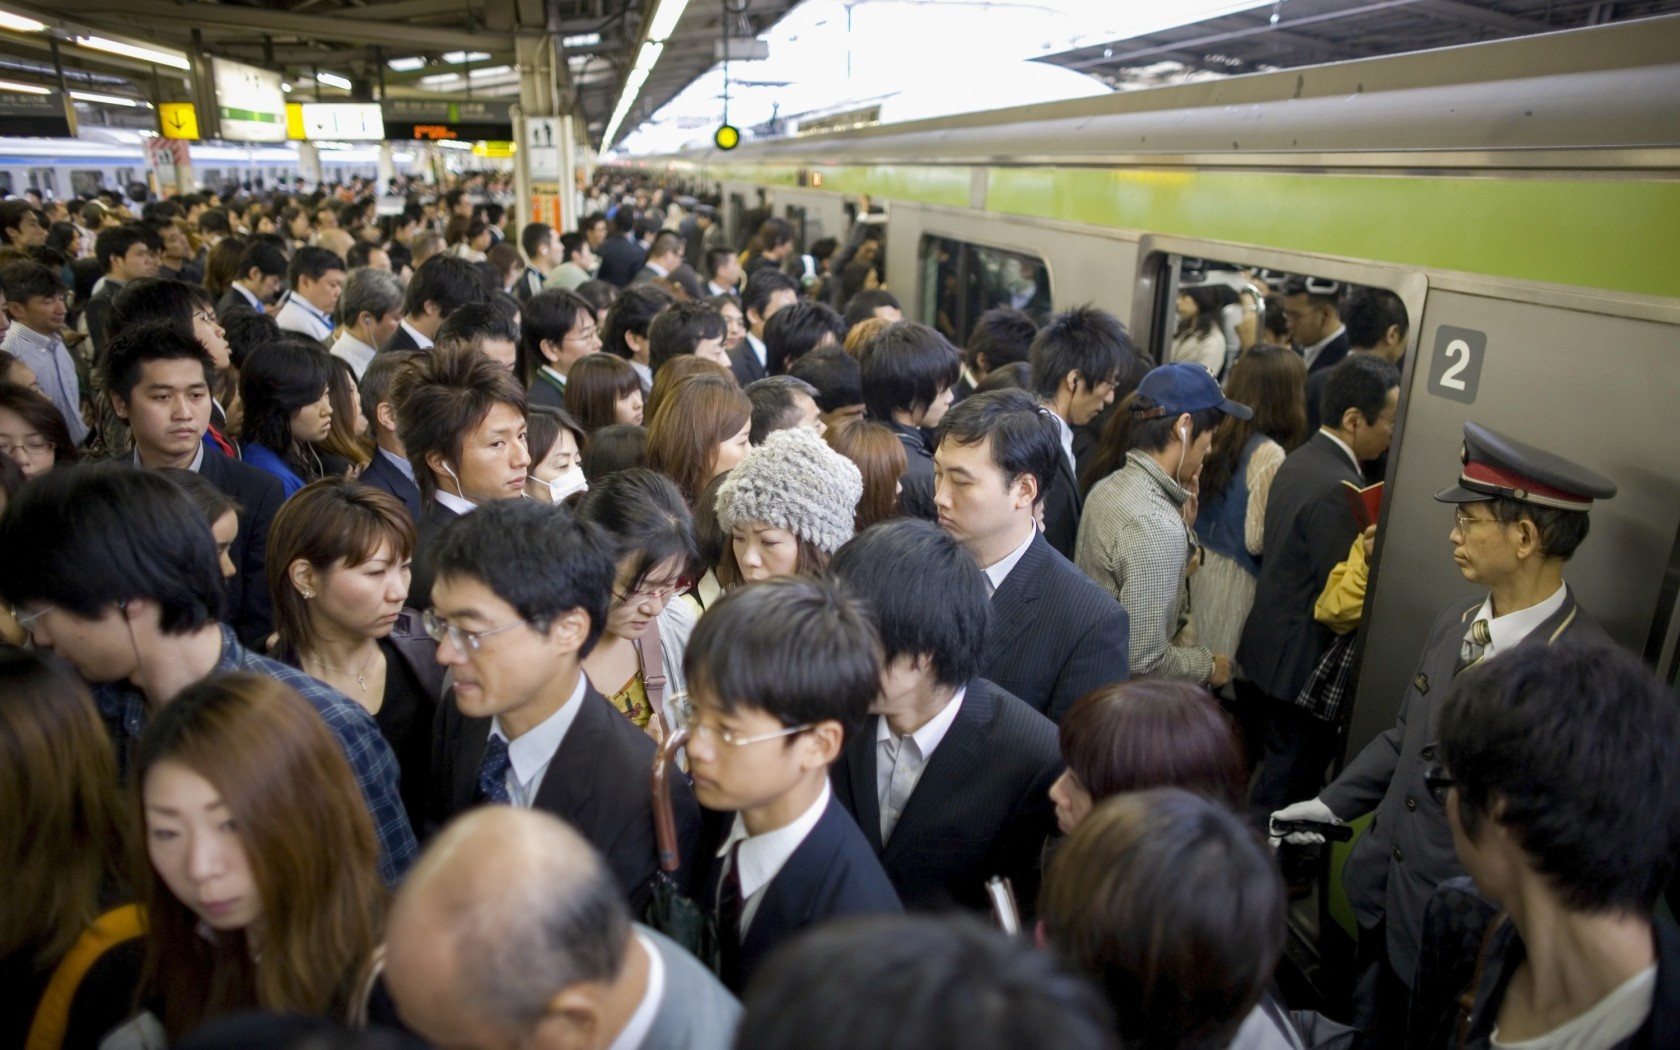 Check out the top 4 most complex and confusing train stations according to Japanese...